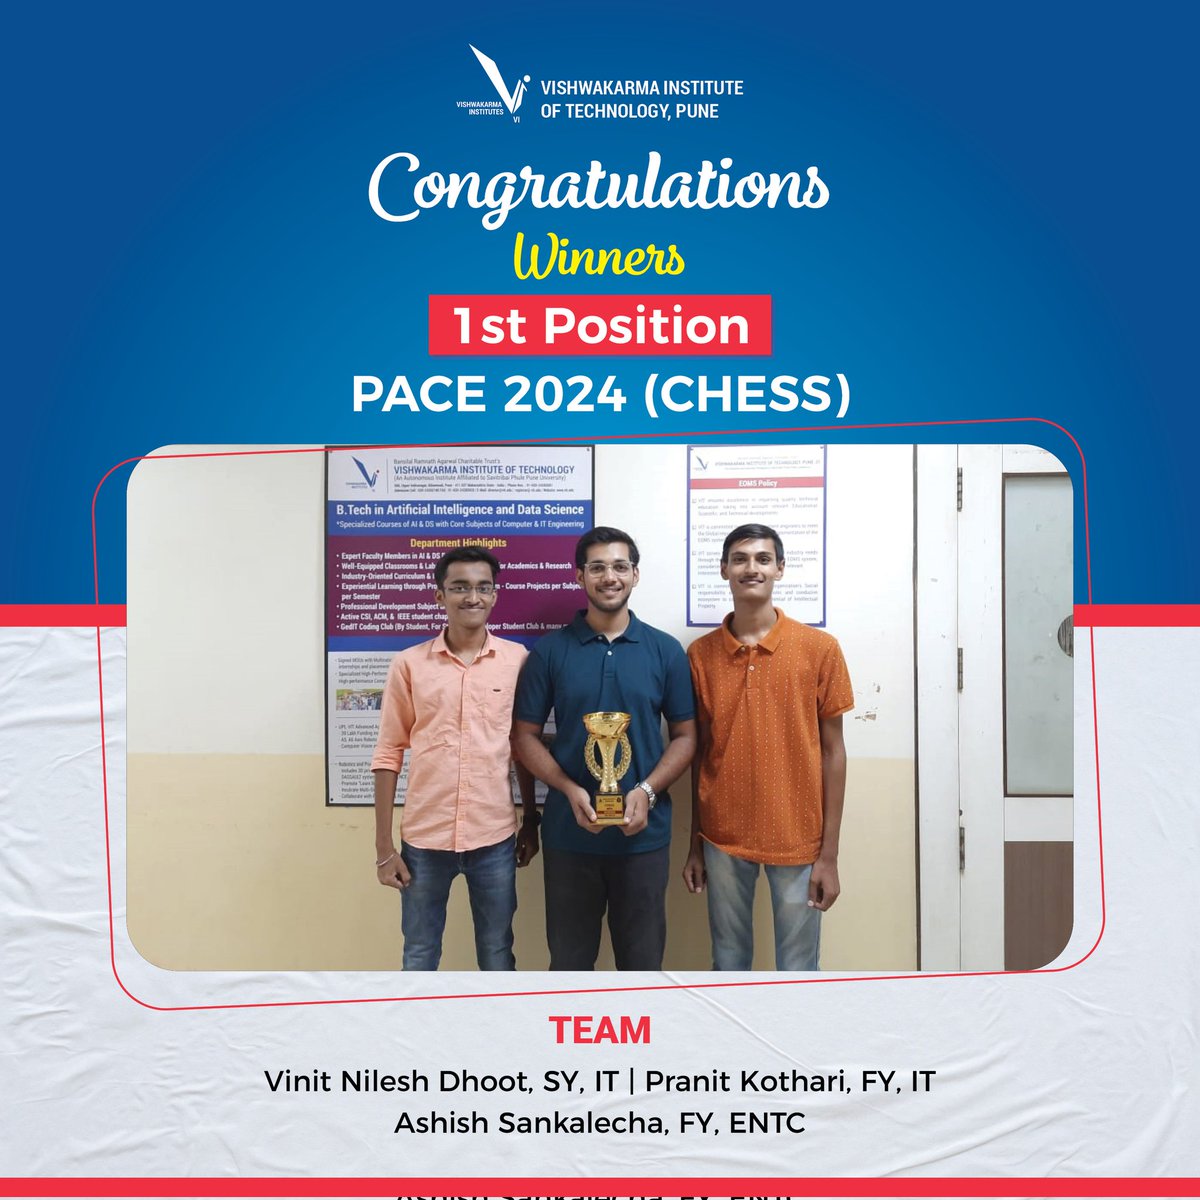 Congratulations to our incredible team for clinching the 1st Position in PACE 2024 (CHESS)! Way to go, Vinit Nilesh Dhoot, Pranit Kothari, and Ashish Sankalecha!
#TeamVictory #PACE2024Champions #ChessMasters #WinningTeam #ProudMoment #ChessChampions #CelebrationTime #GoTeam